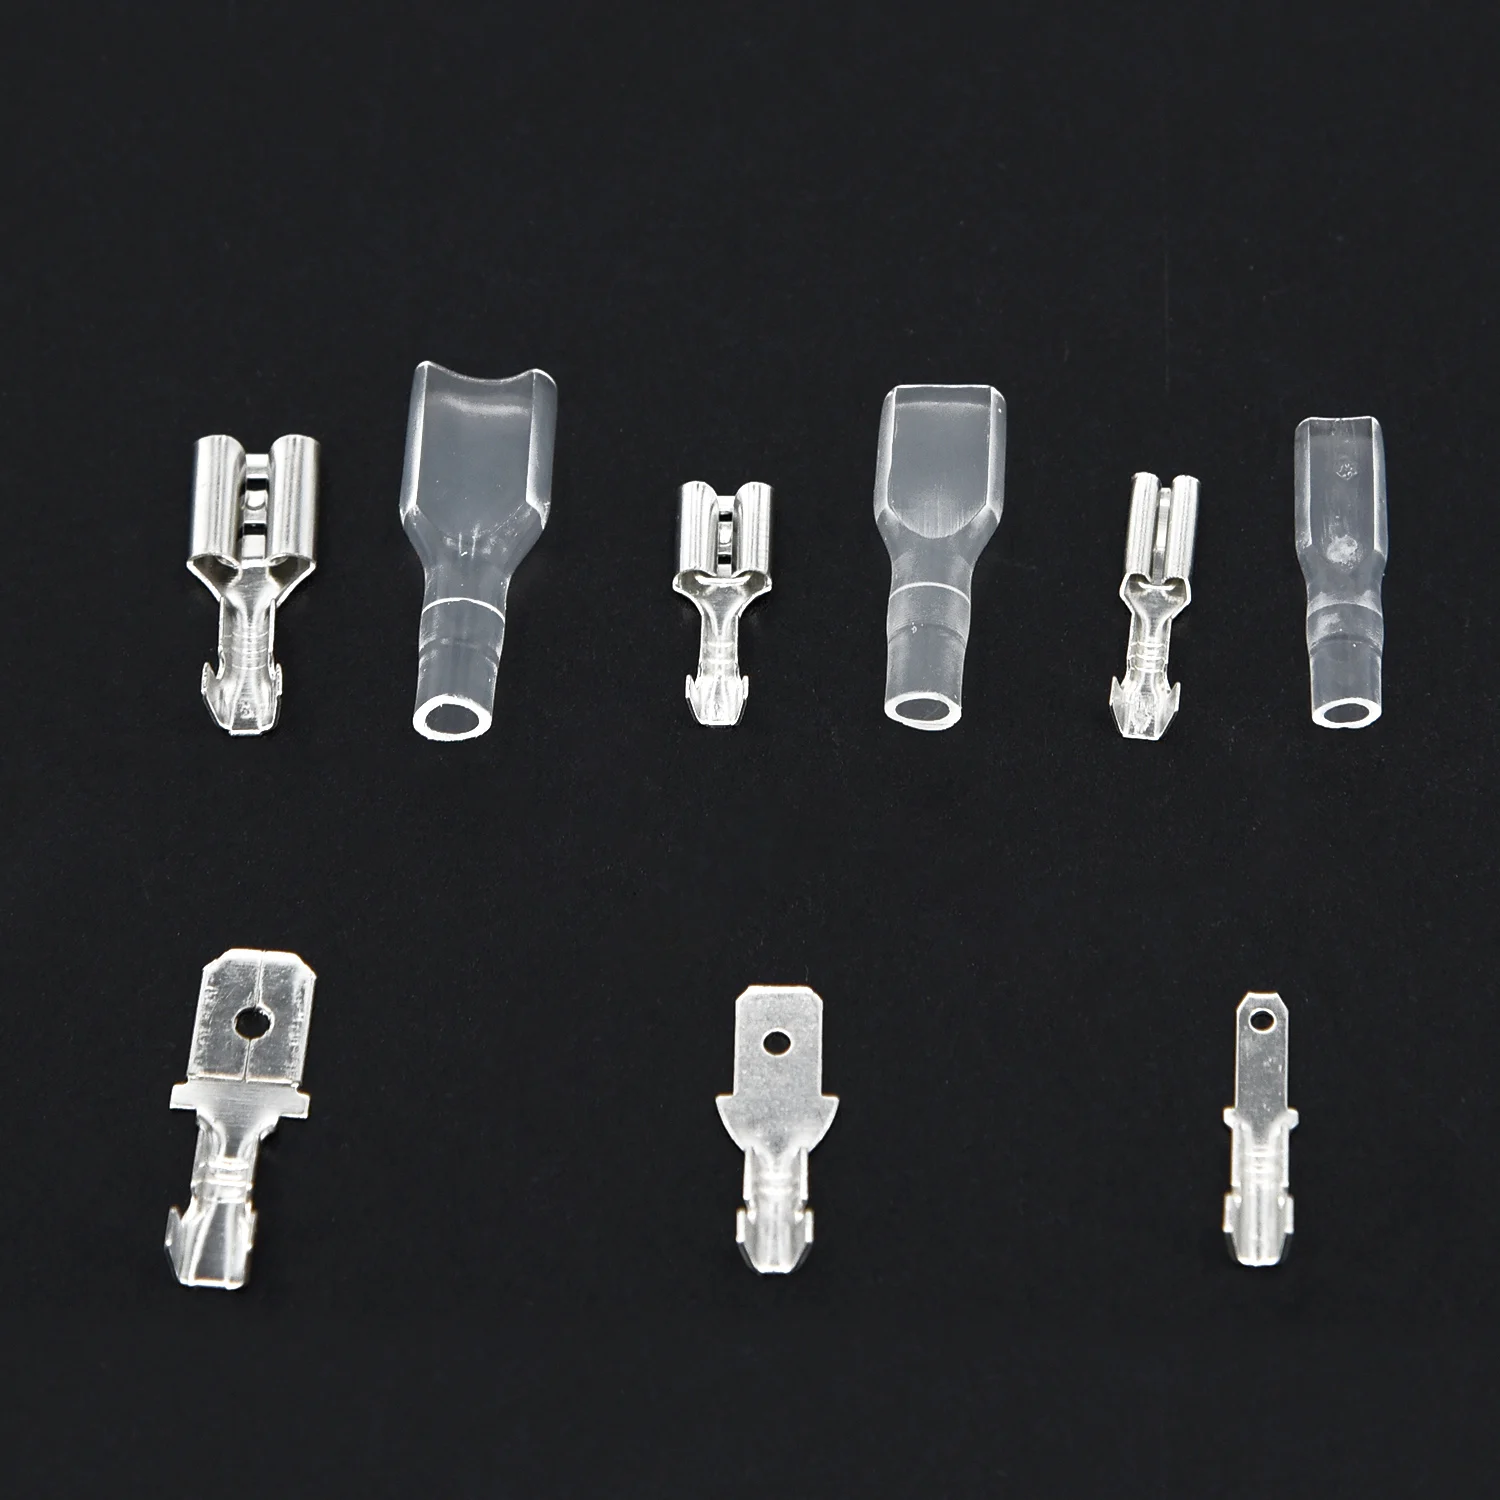 

270pcs Female&Male Spade Crimp Terminal Connectors Set 2.8/4.8/6.3mm Widely Used To Electrical Wire Connecting Auto Repair Tool